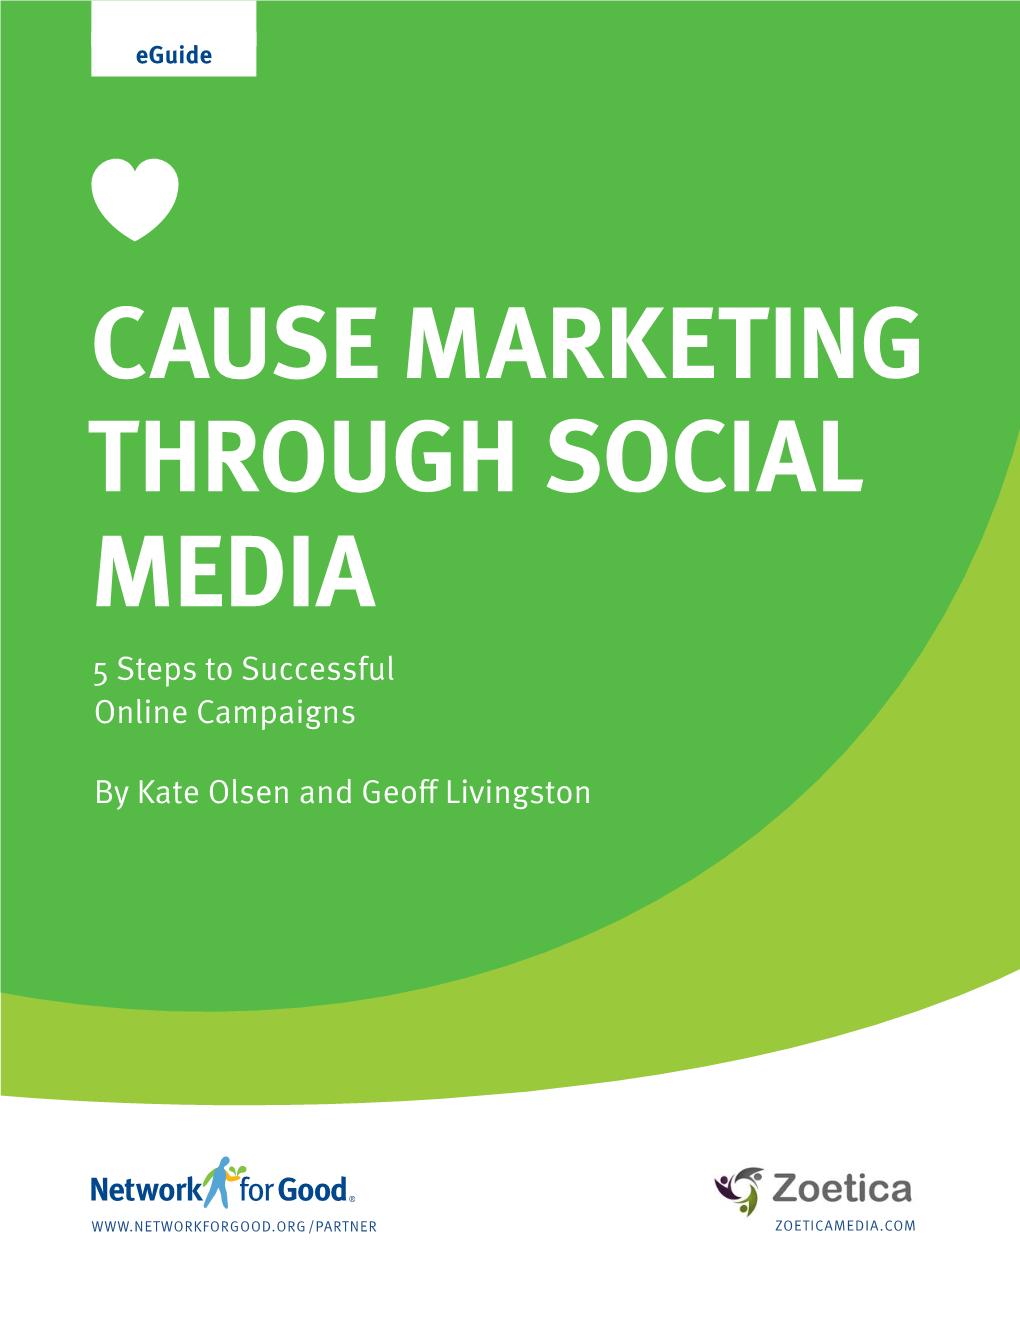 CAUSE MARKETING THROUGH SOCIAL MEDIA 5 Steps to Successful Online Campaigns